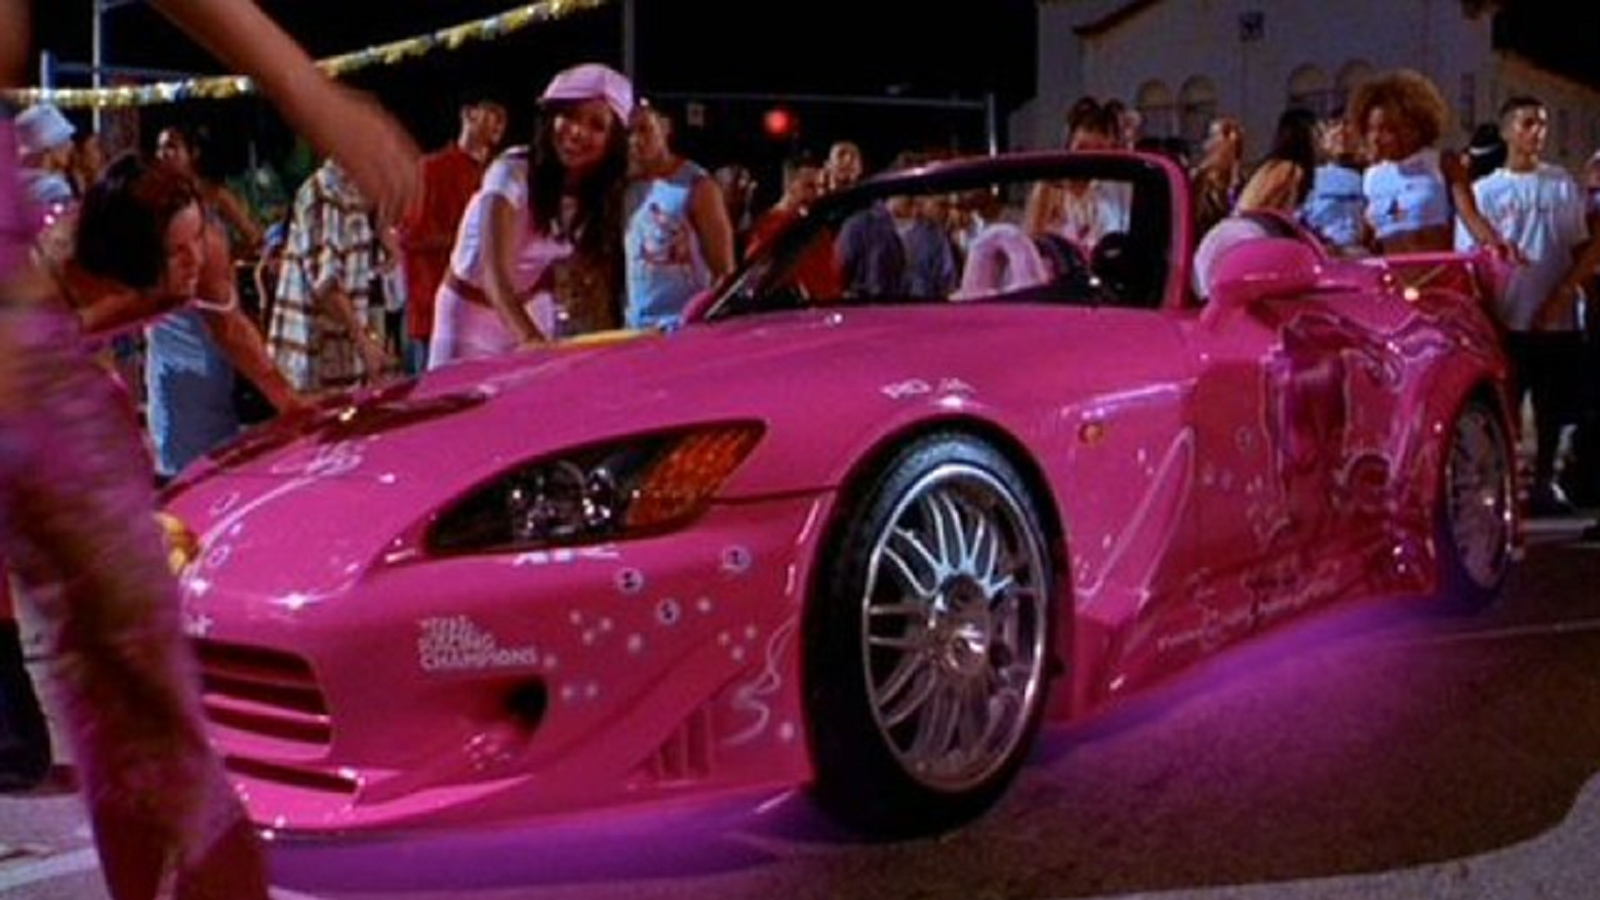 10 Facts About Sukis S2k In Fast And Furious S2ki